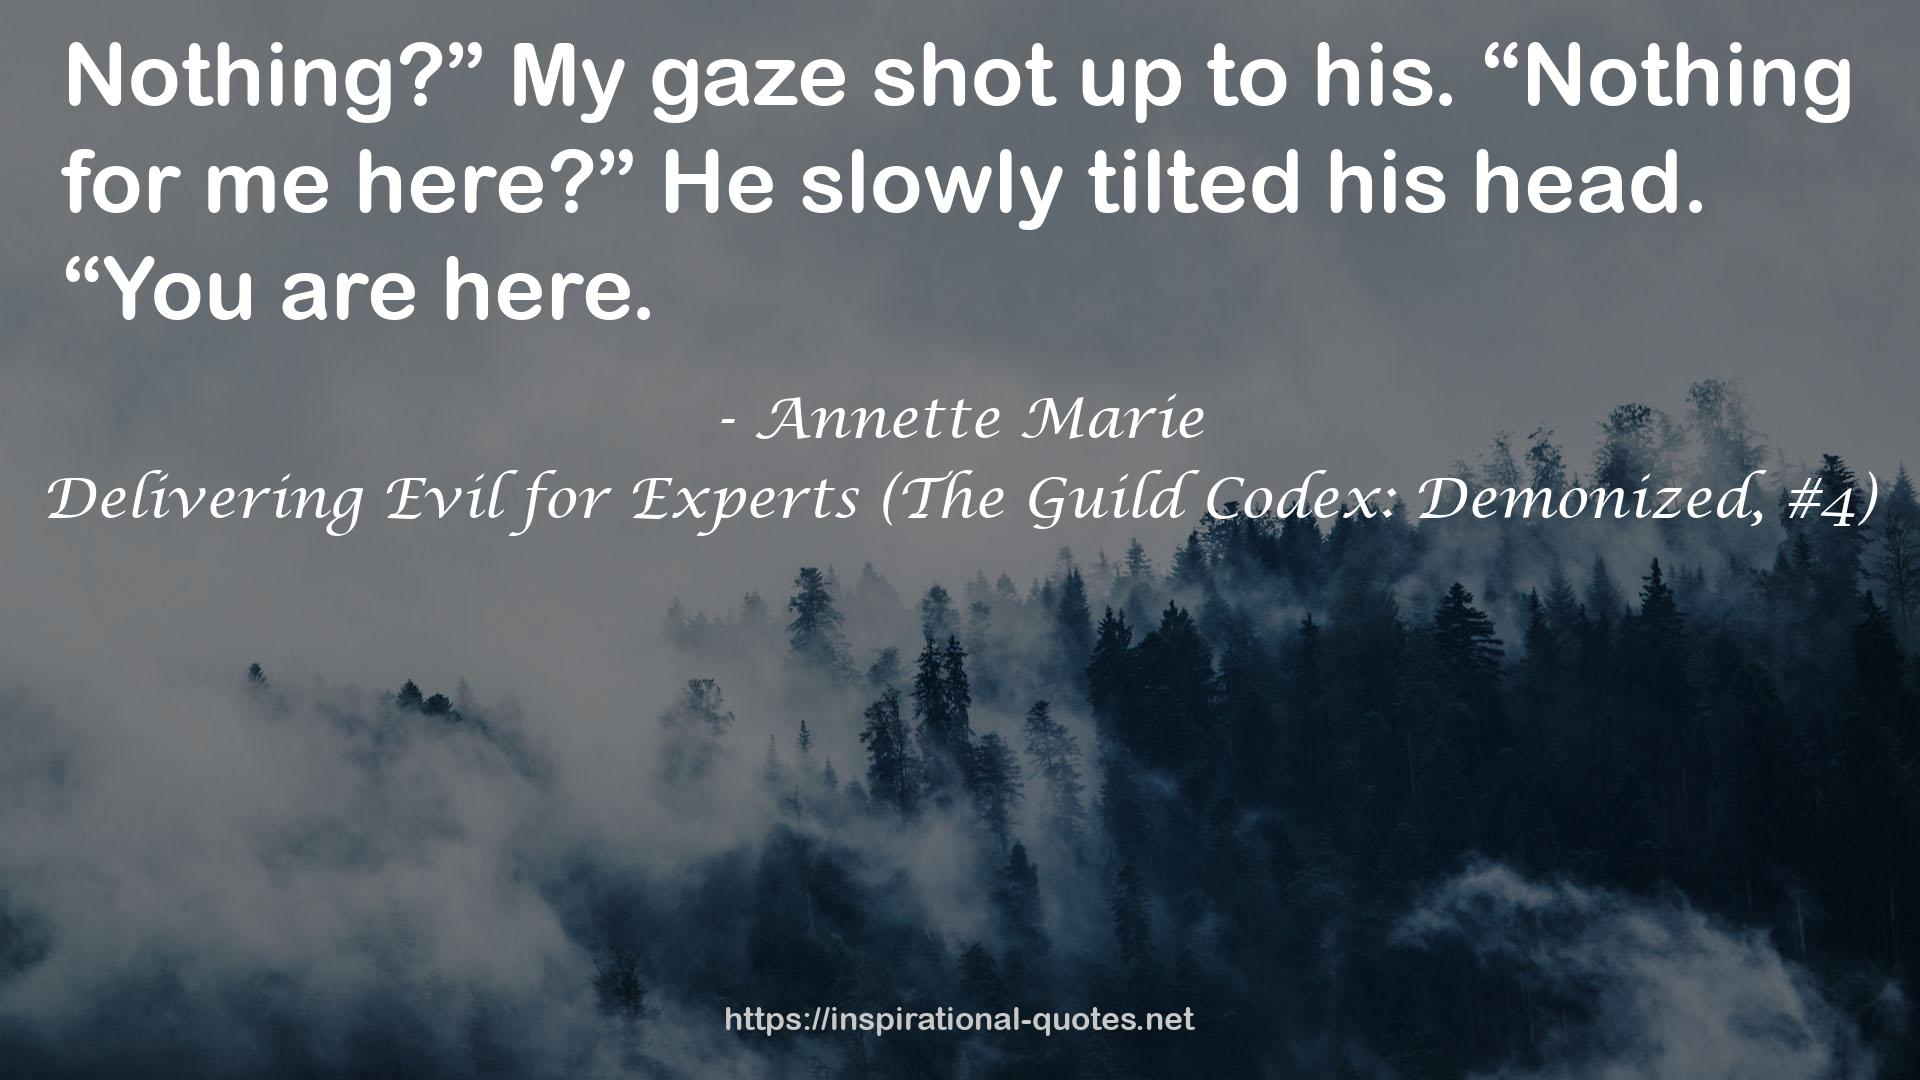 Delivering Evil for Experts (The Guild Codex: Demonized, #4) QUOTES